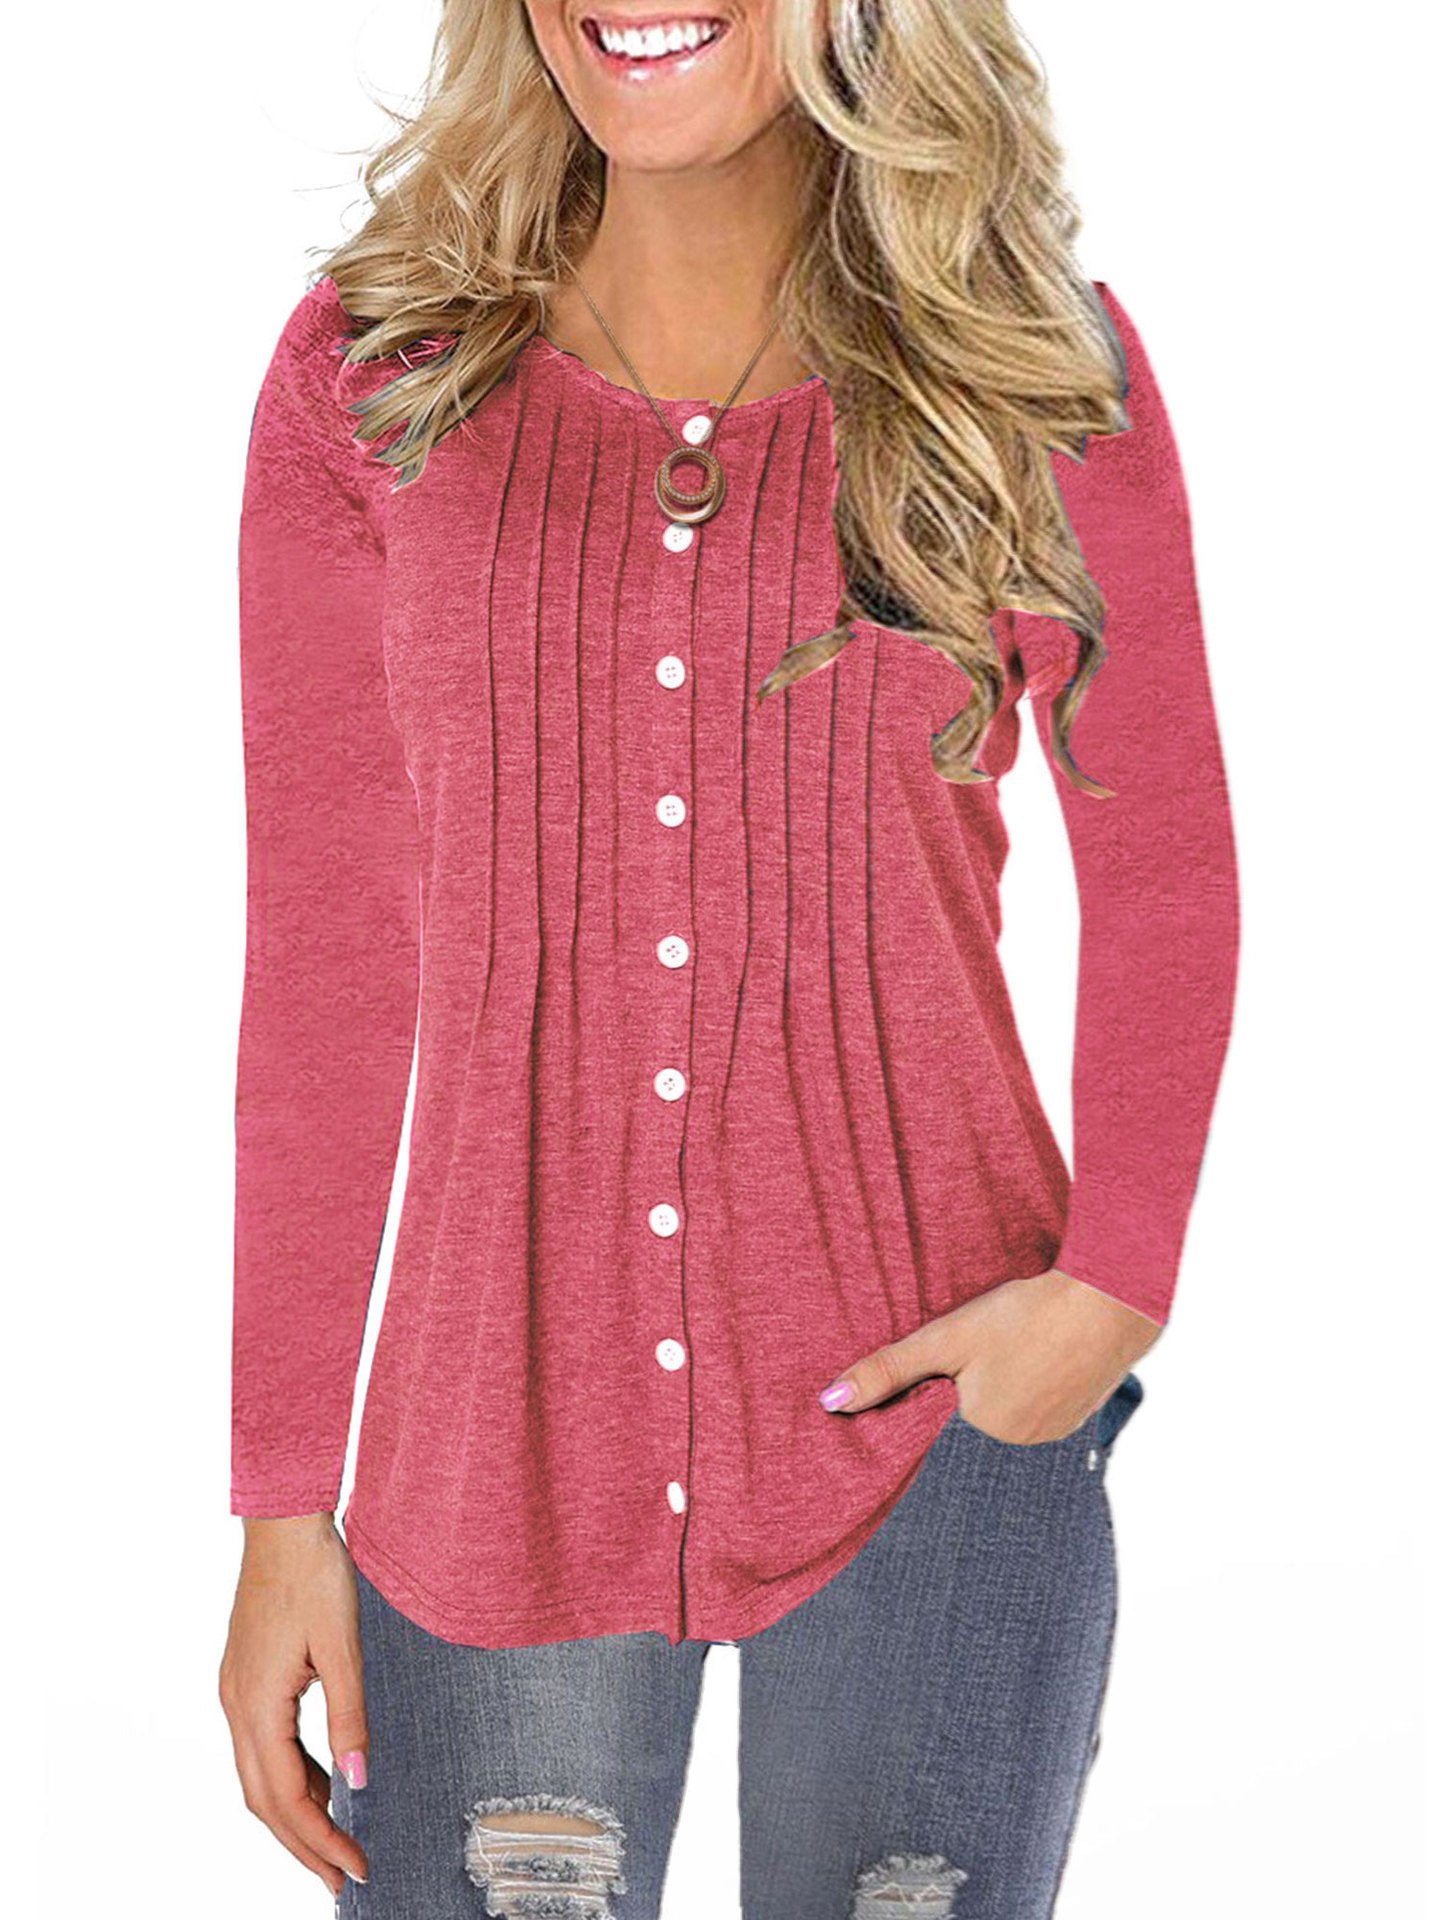 Women's Round Collar Solid Color Casual Long Sleeve Top